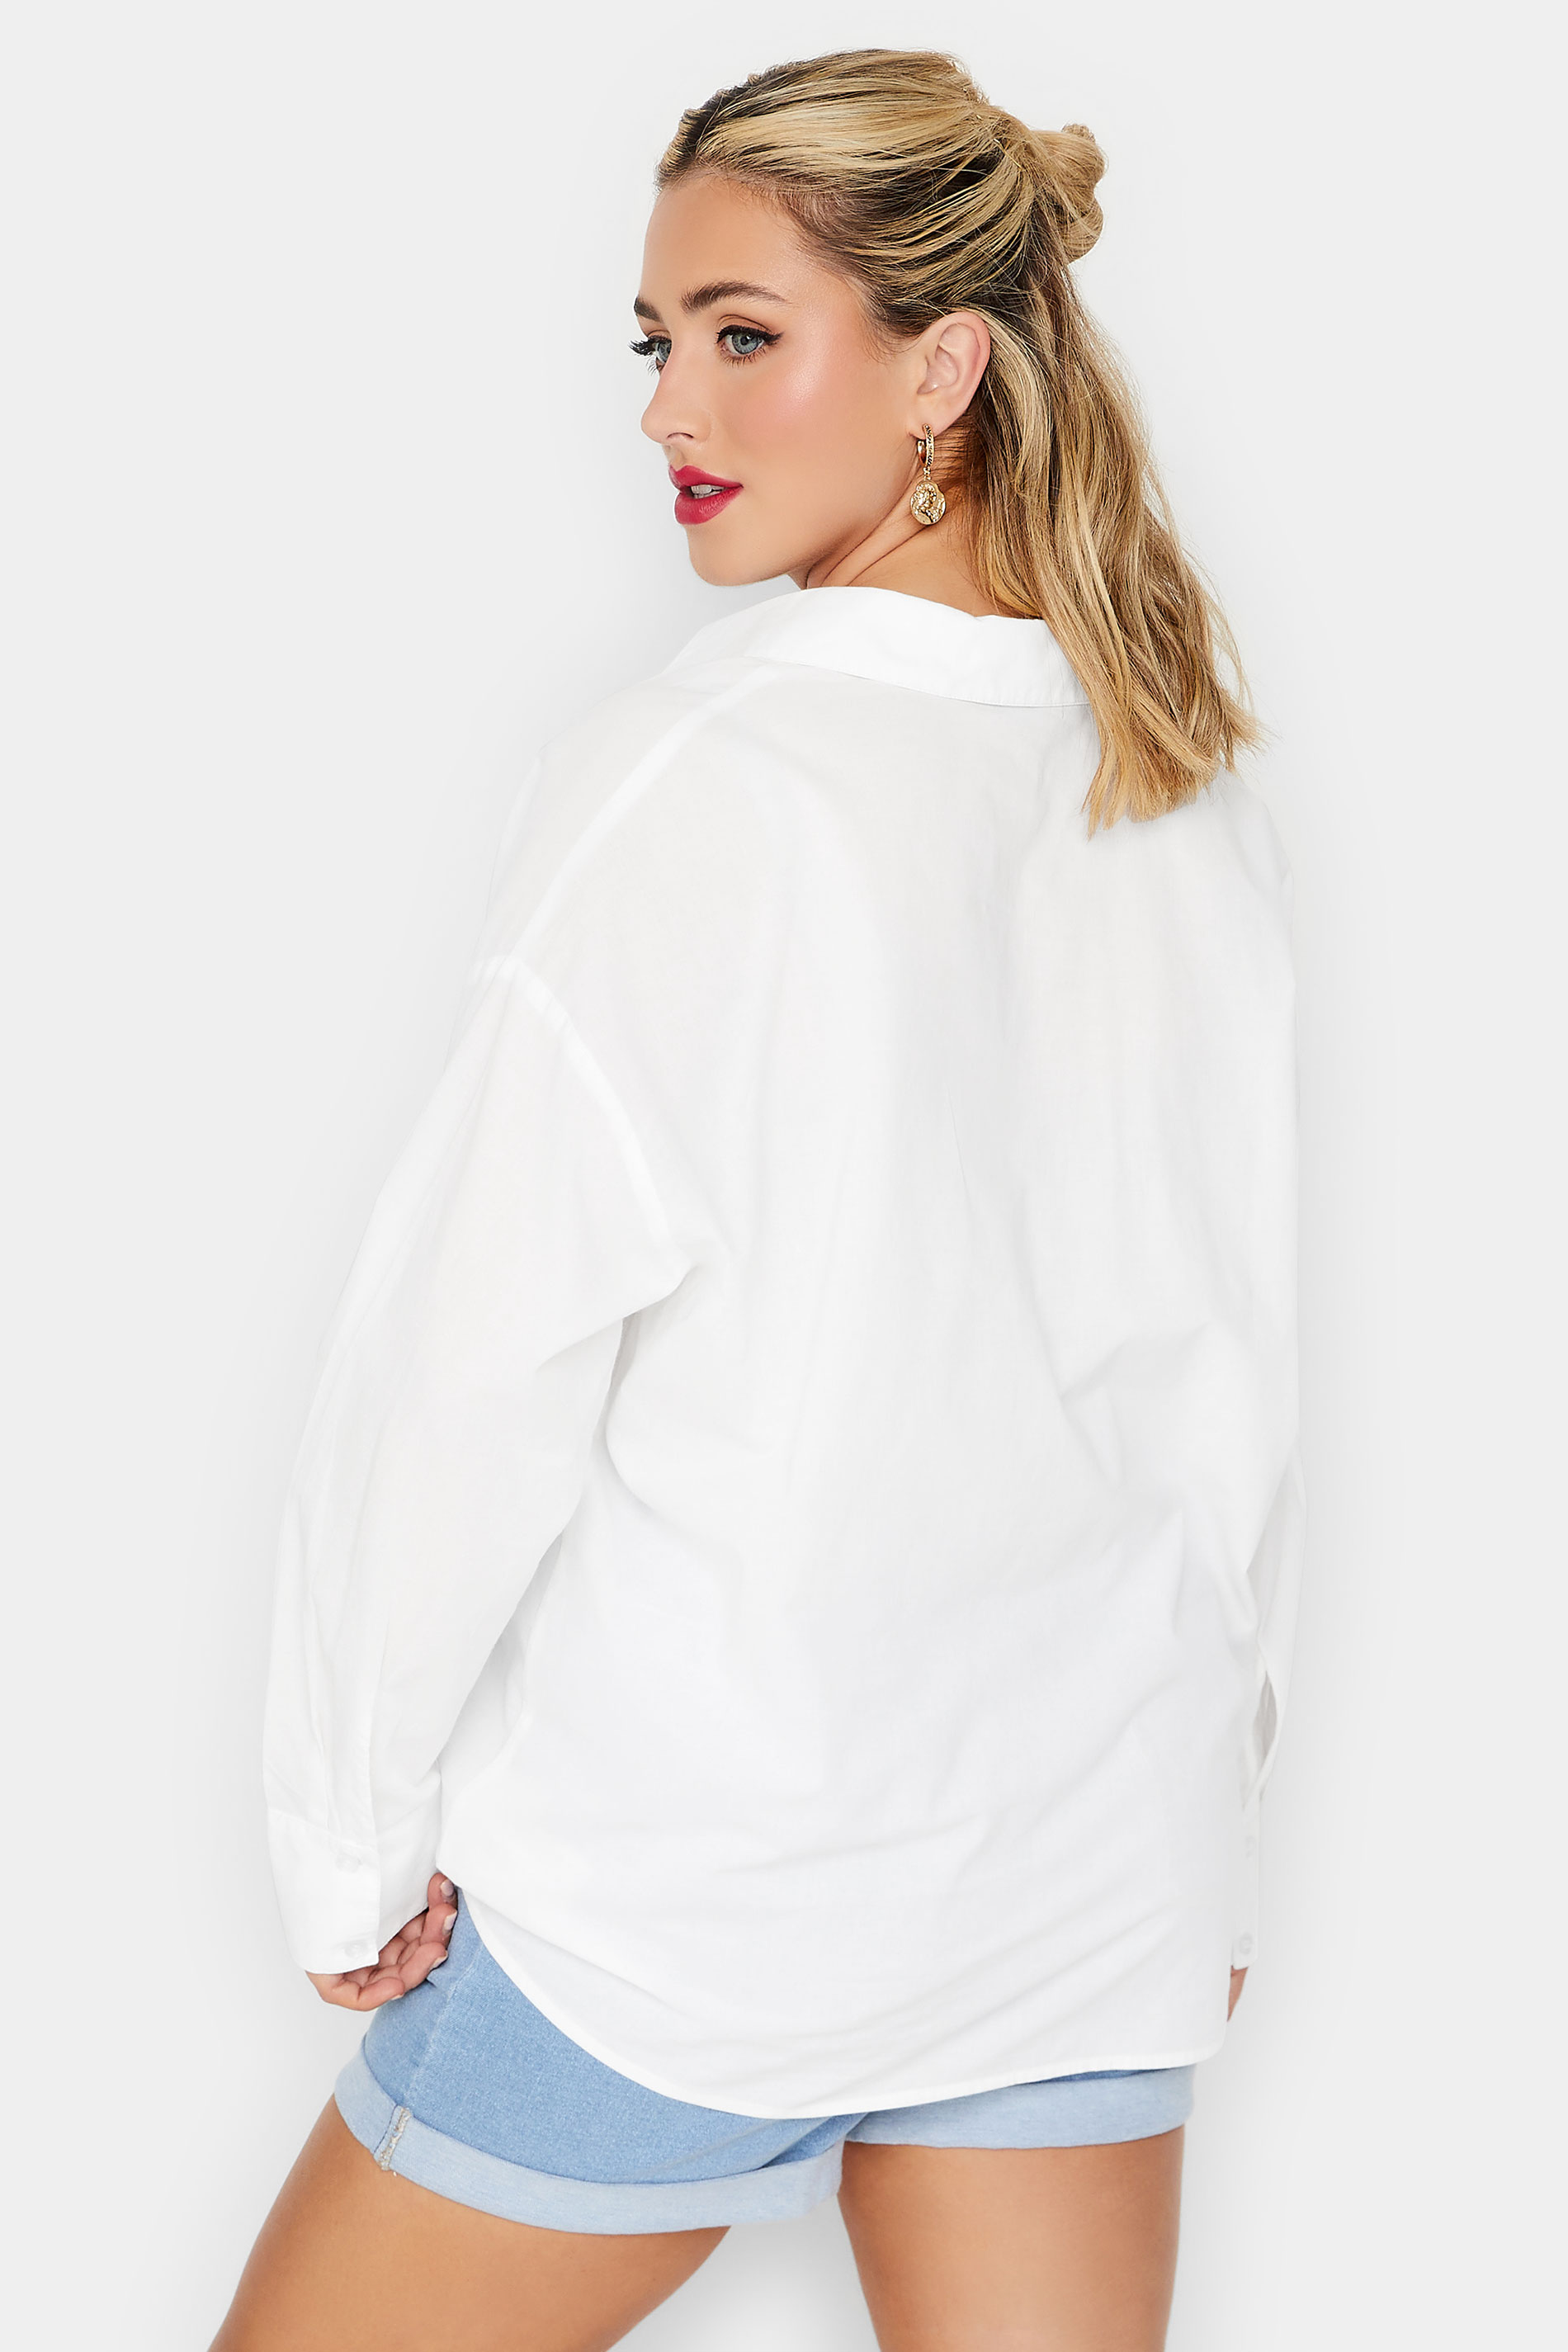 LIMITED COLLECTION Plus Size White Tie Hem Shirt | Yours Clothing 3